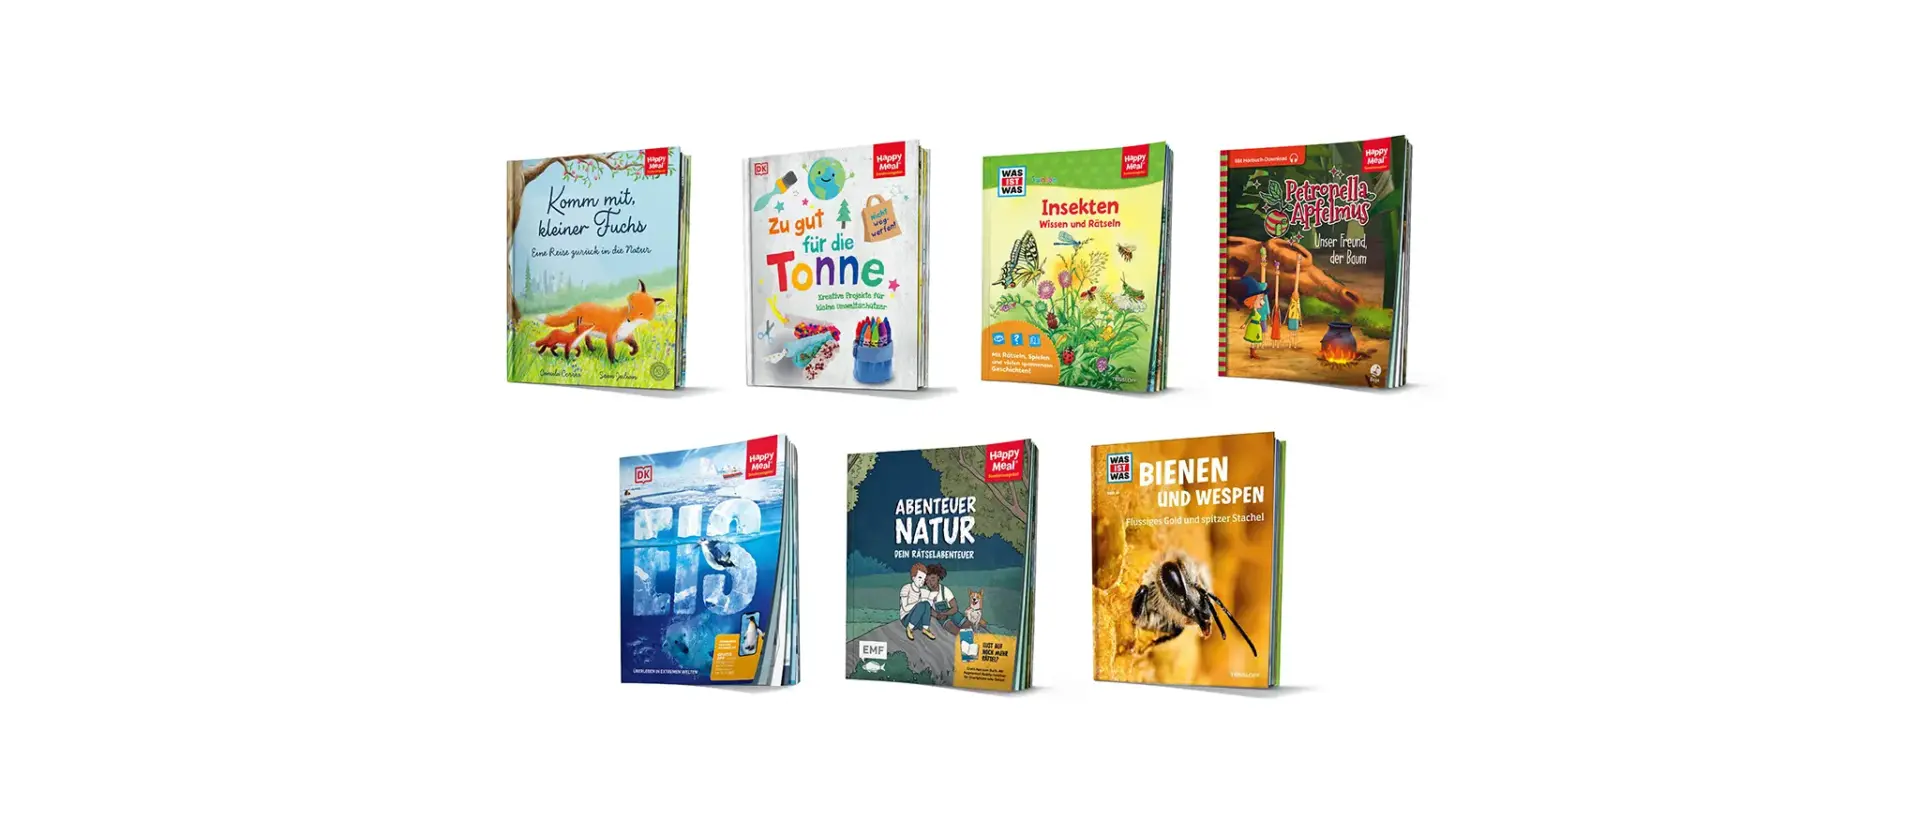 A set of 7 books each with different covers relating to the environment and nature